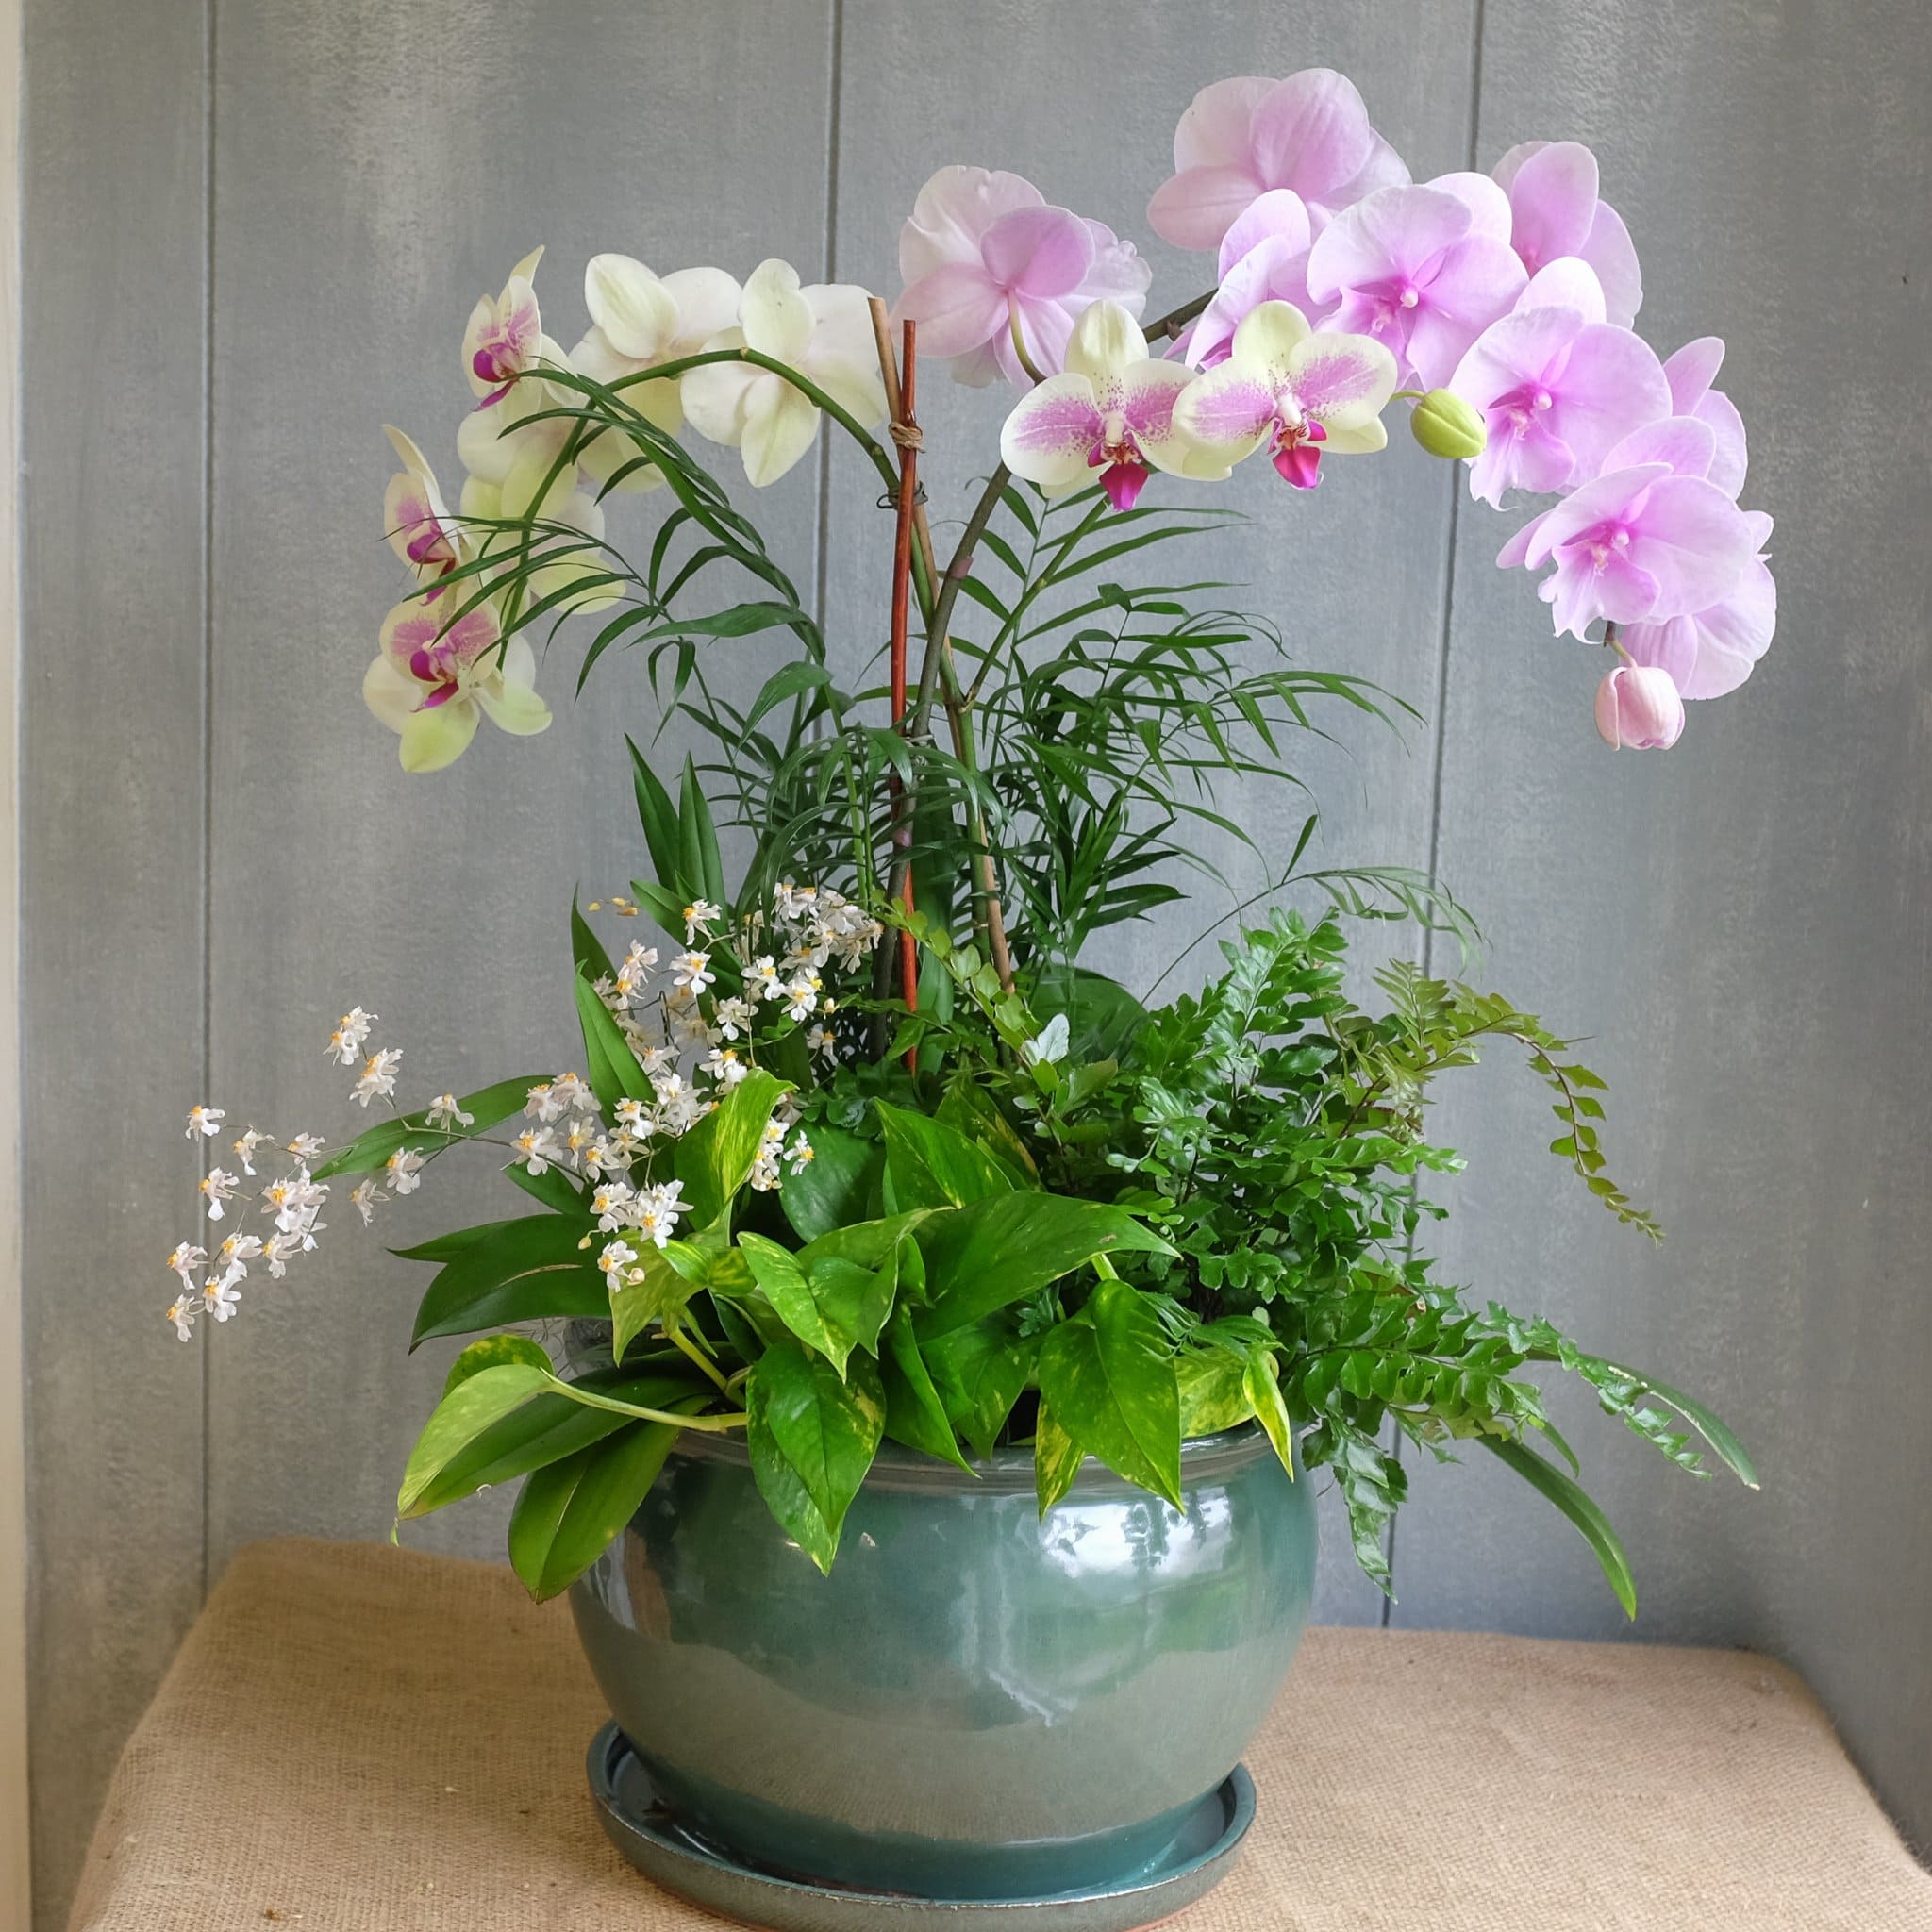 15 houseplants that can reduce humidity in your bathroom - 75